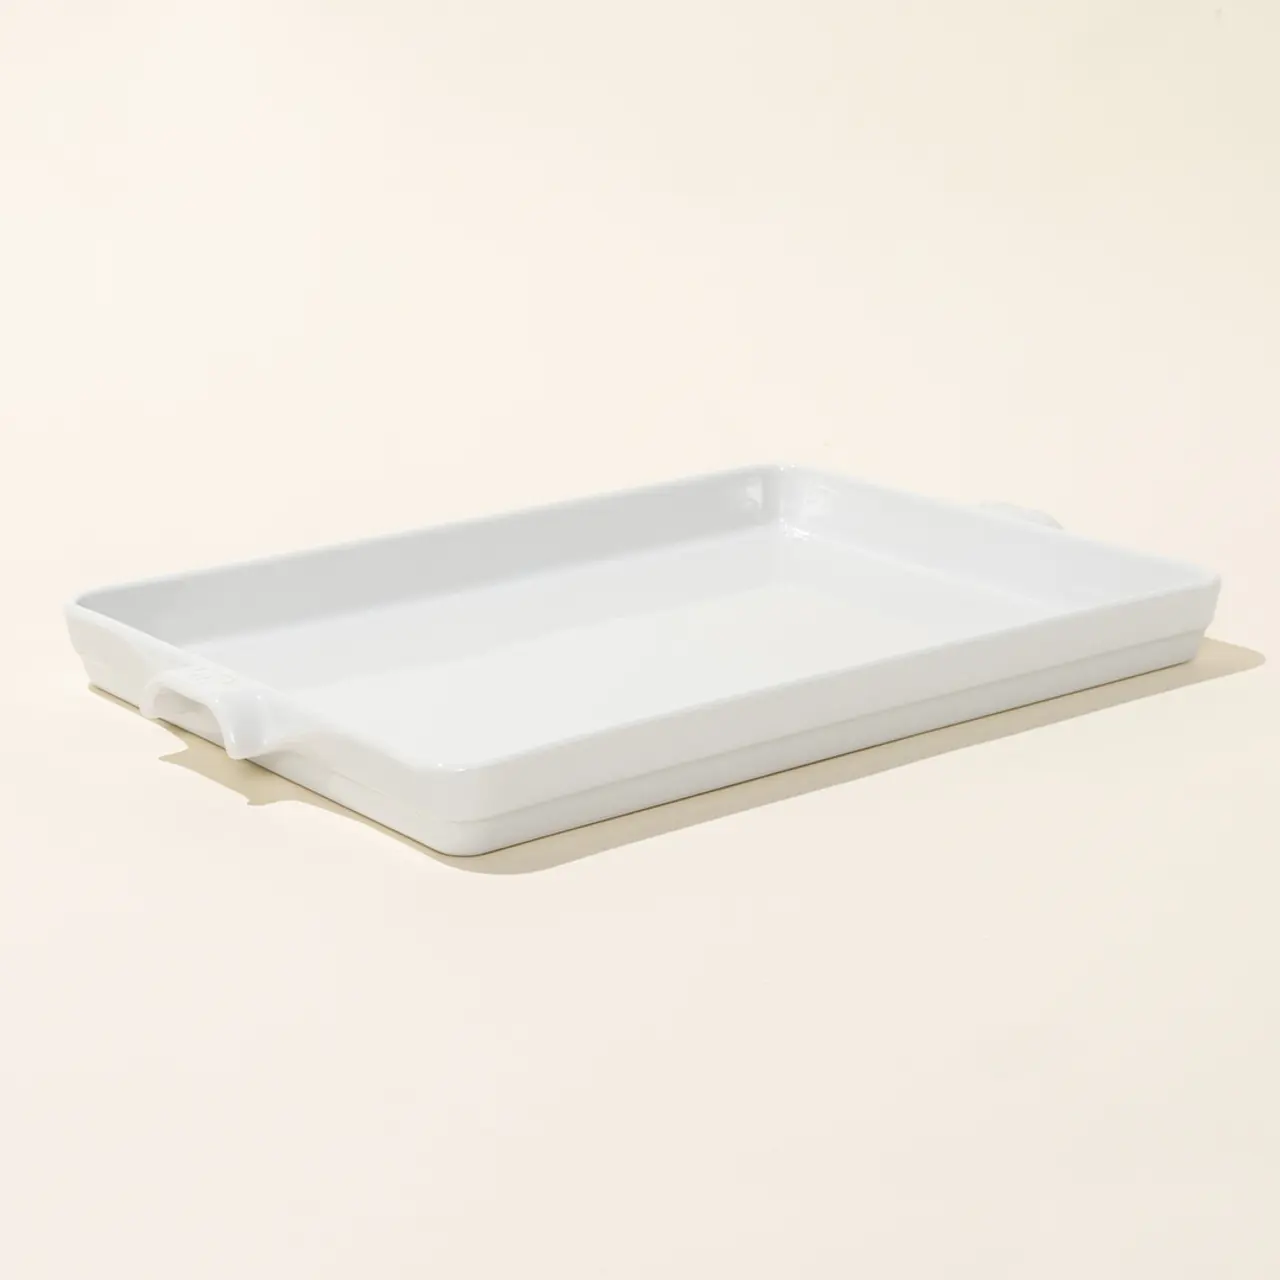 A simple white ceramic baking dish is featured on a light beige background.